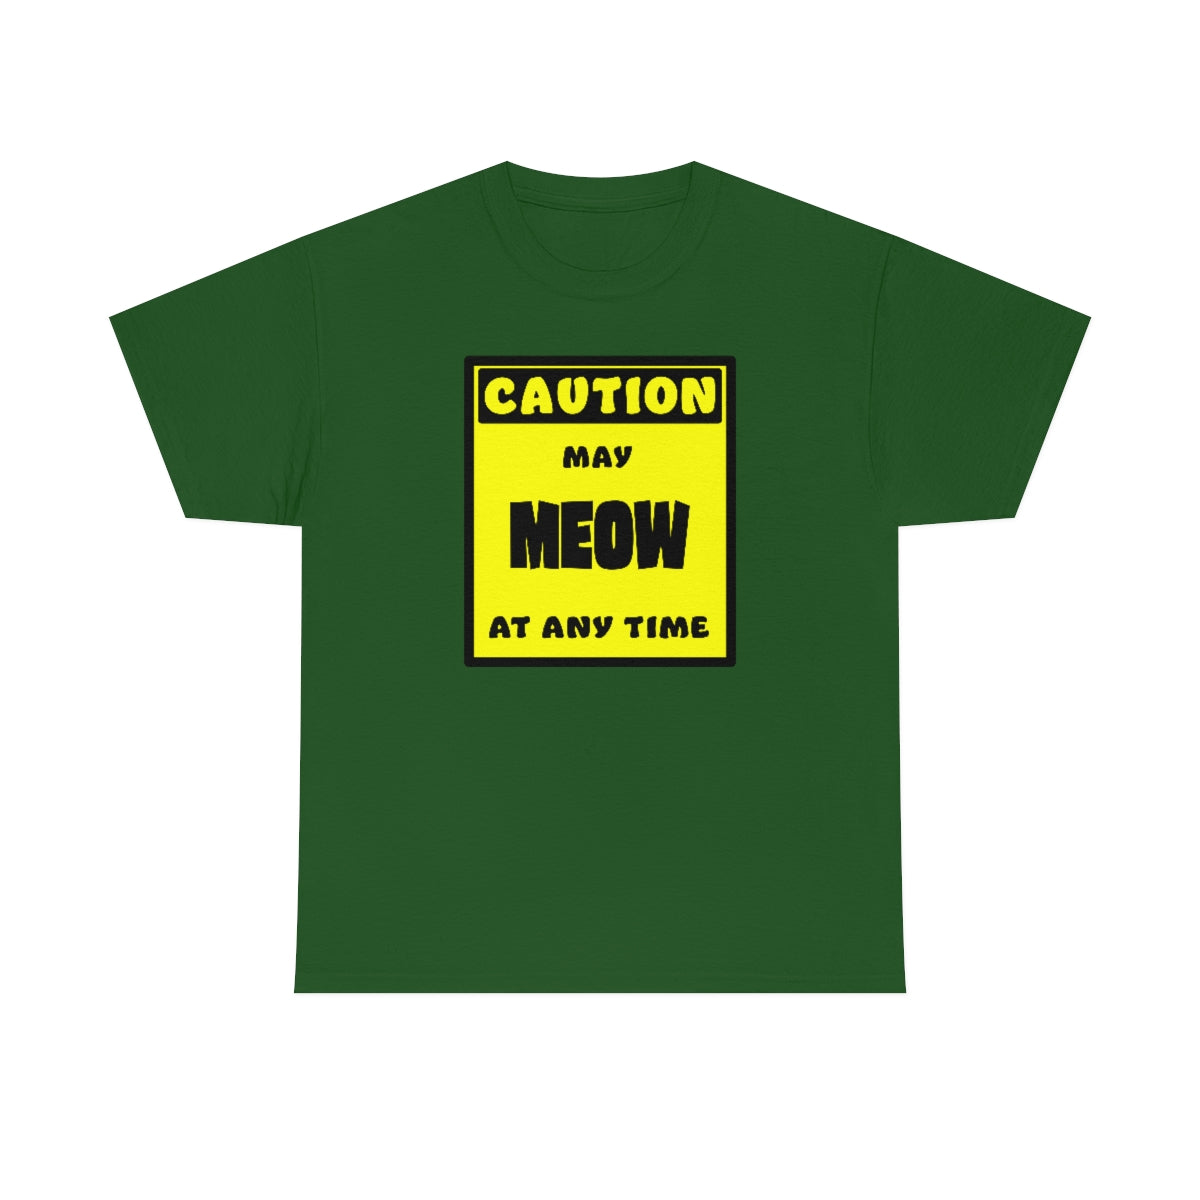 CAUTION! May MEOW at any time! - T-Shirt T-Shirt AFLT-Whootorca Green S 